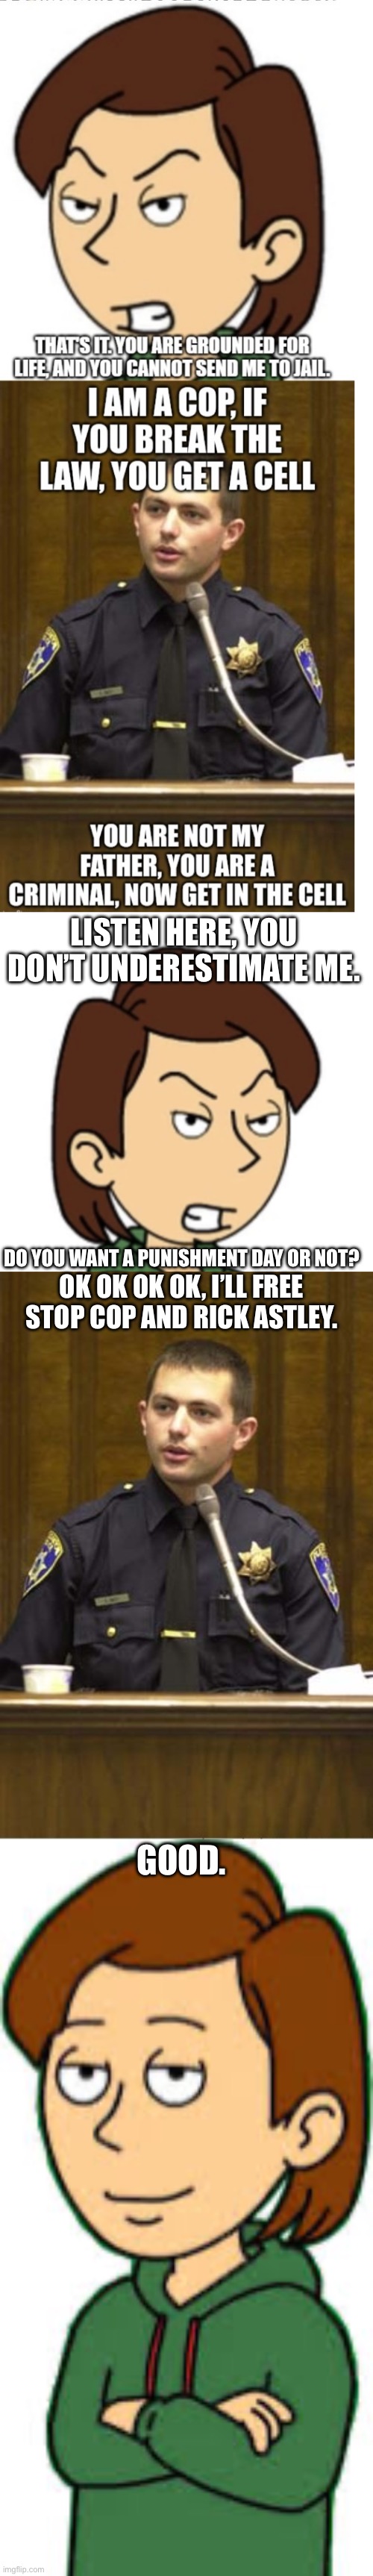 Bro said “get” as his title | LISTEN HERE, YOU DON’T UNDERESTIMATE ME. DO YOU WANT A PUNISHMENT DAY OR NOT? OK OK OK OK, I’LL FREE STOP COP AND RICK ASTLEY. GOOD. | image tagged in boris anderson,memes,police officer testifying,boris goanimate | made w/ Imgflip meme maker